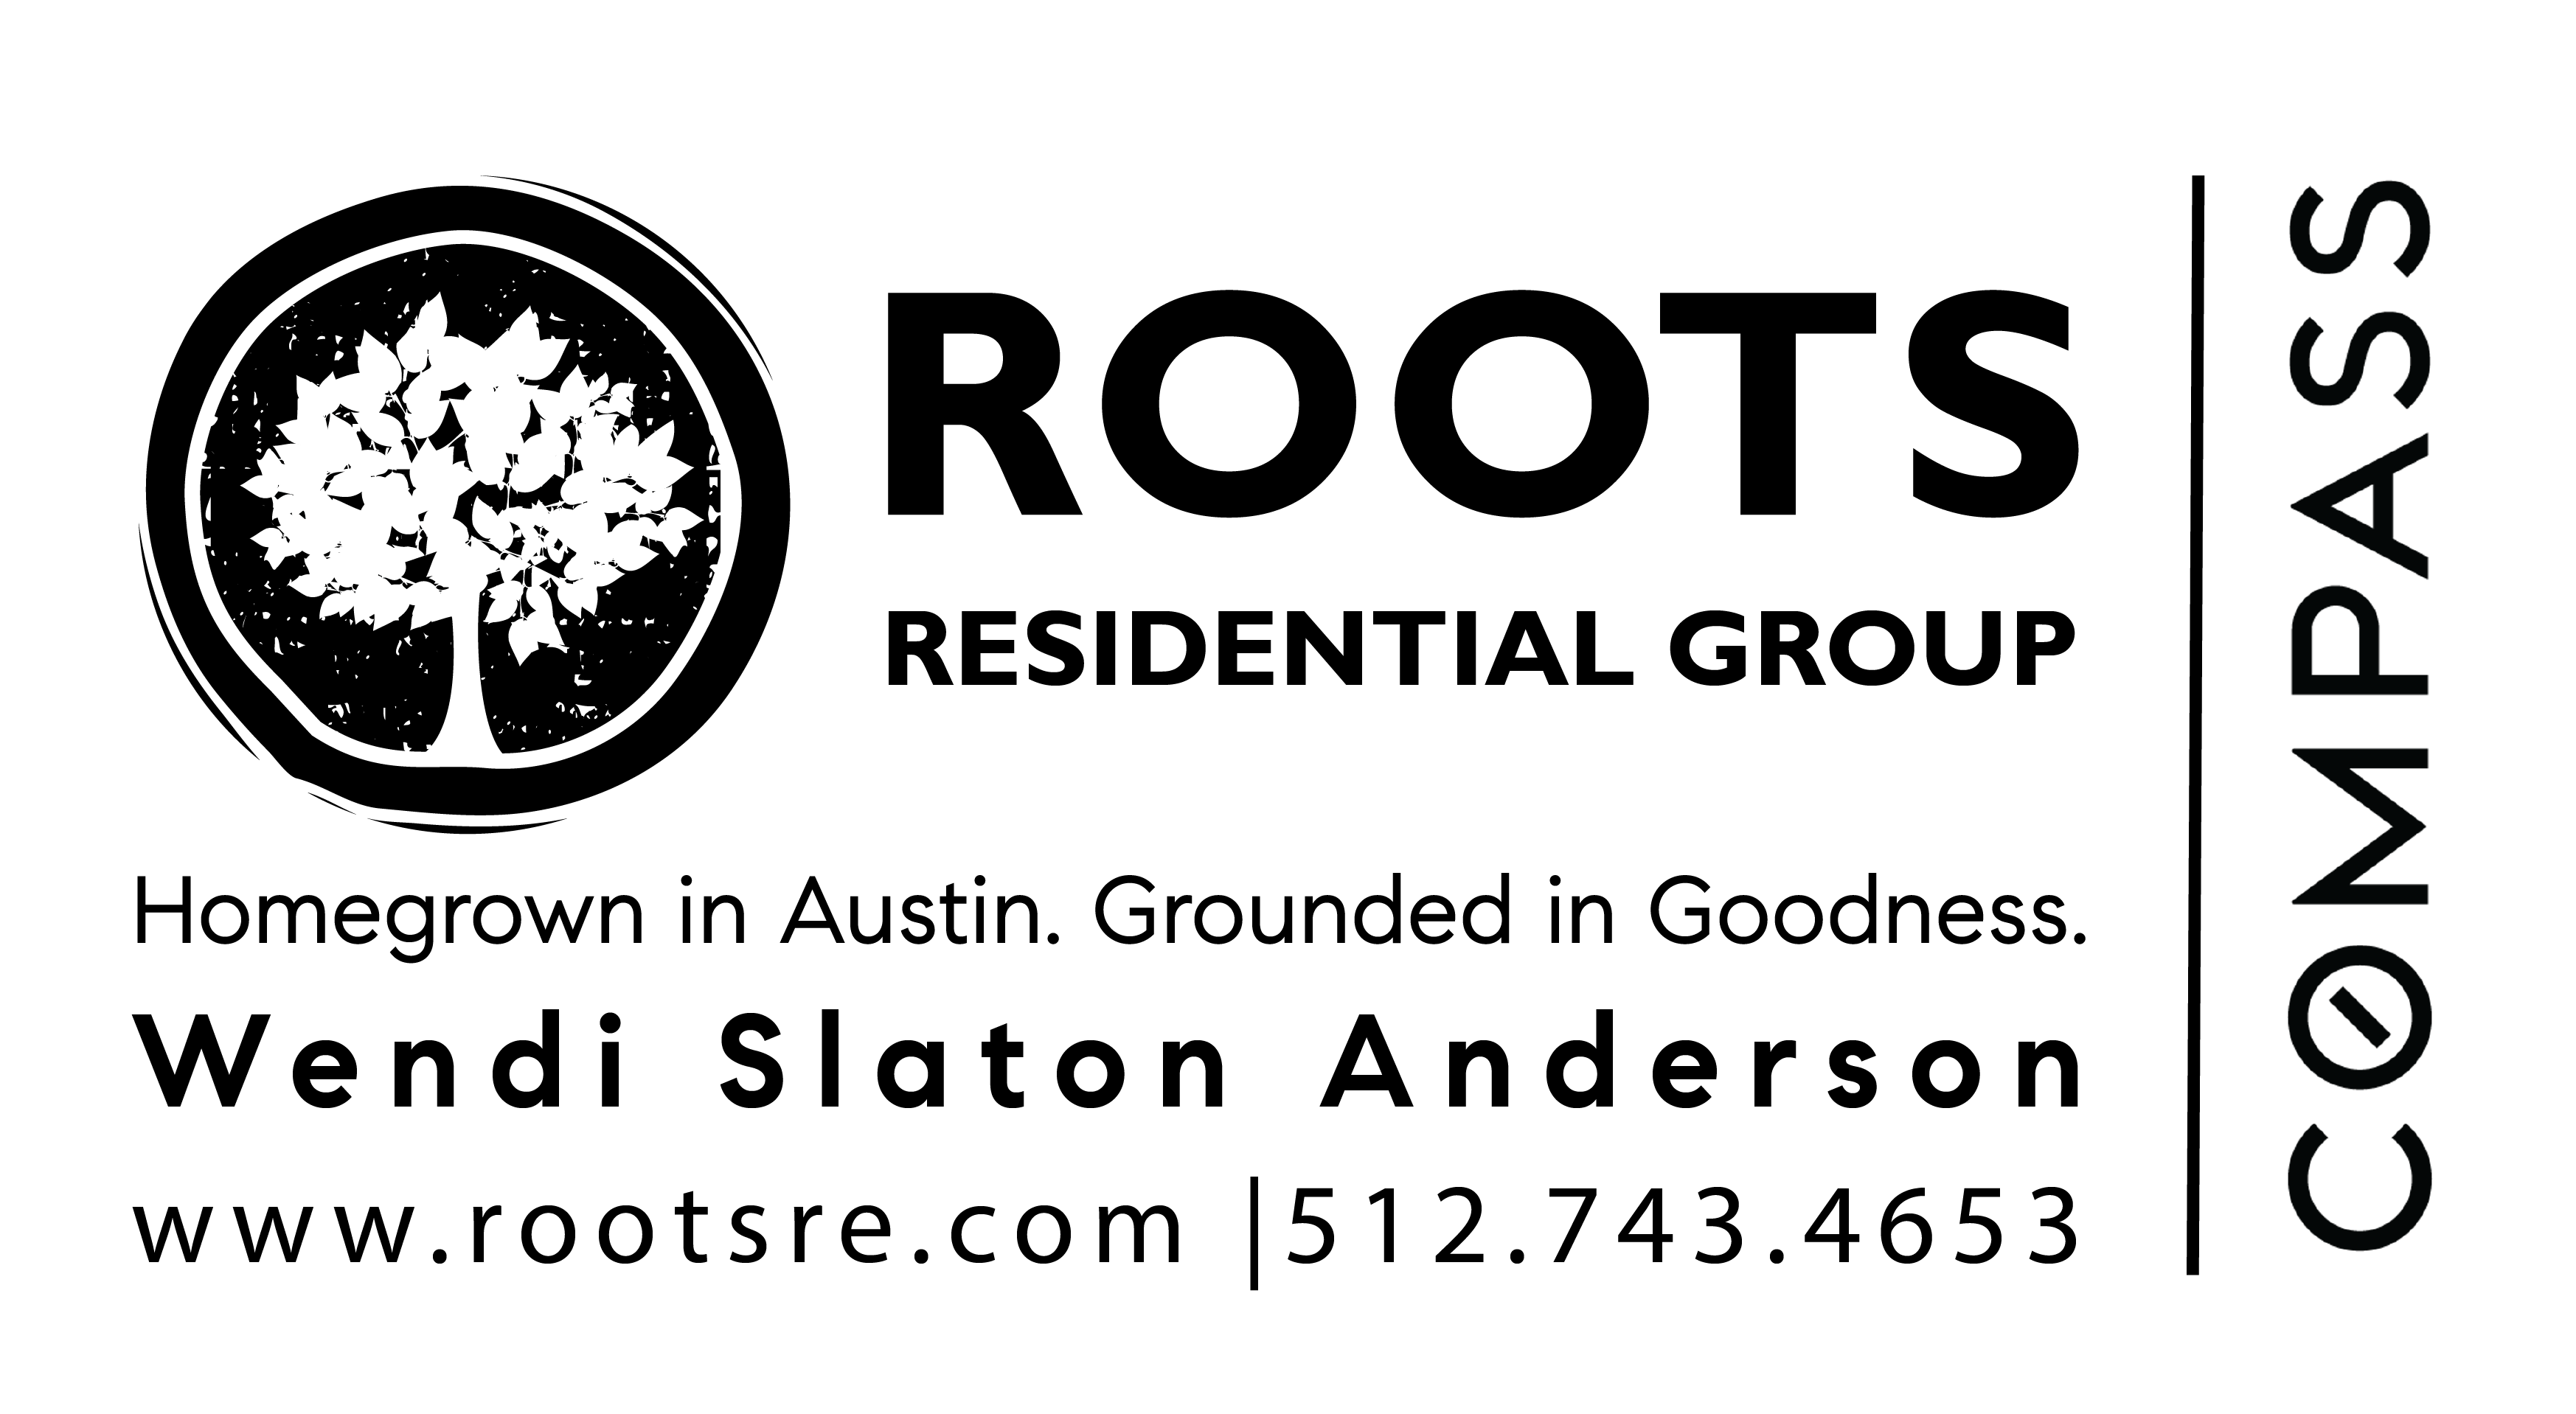 Roots Residential Group Austin